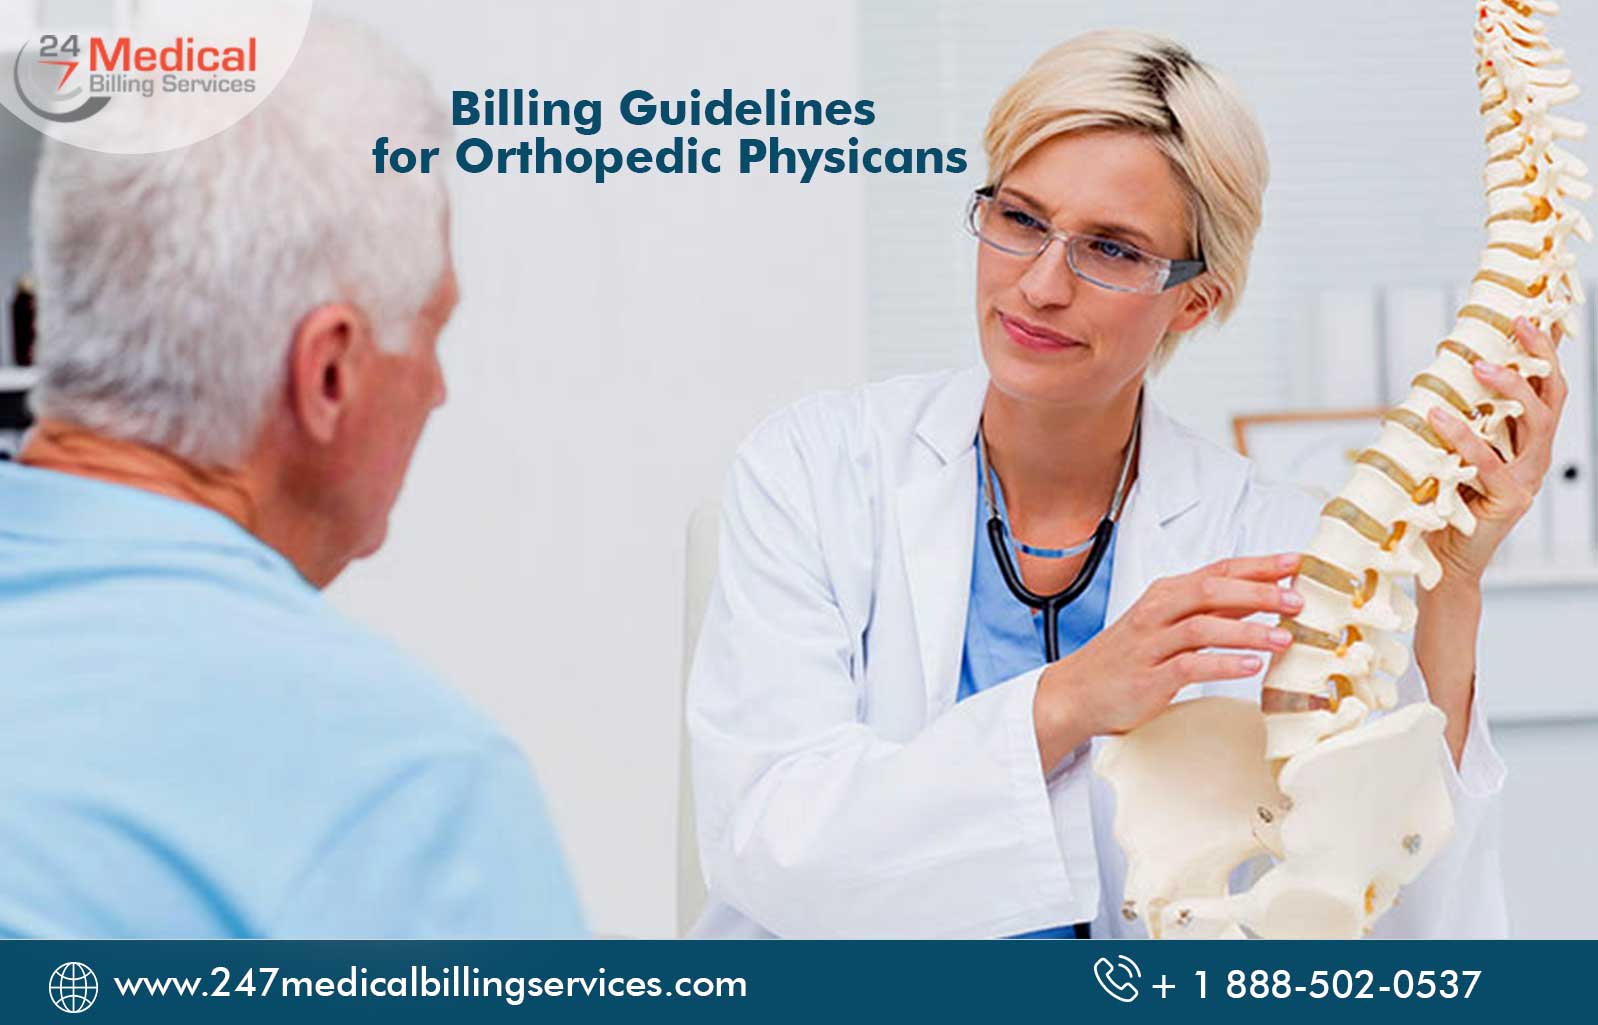  Billing Guidelines for Orthopaedic Physicians